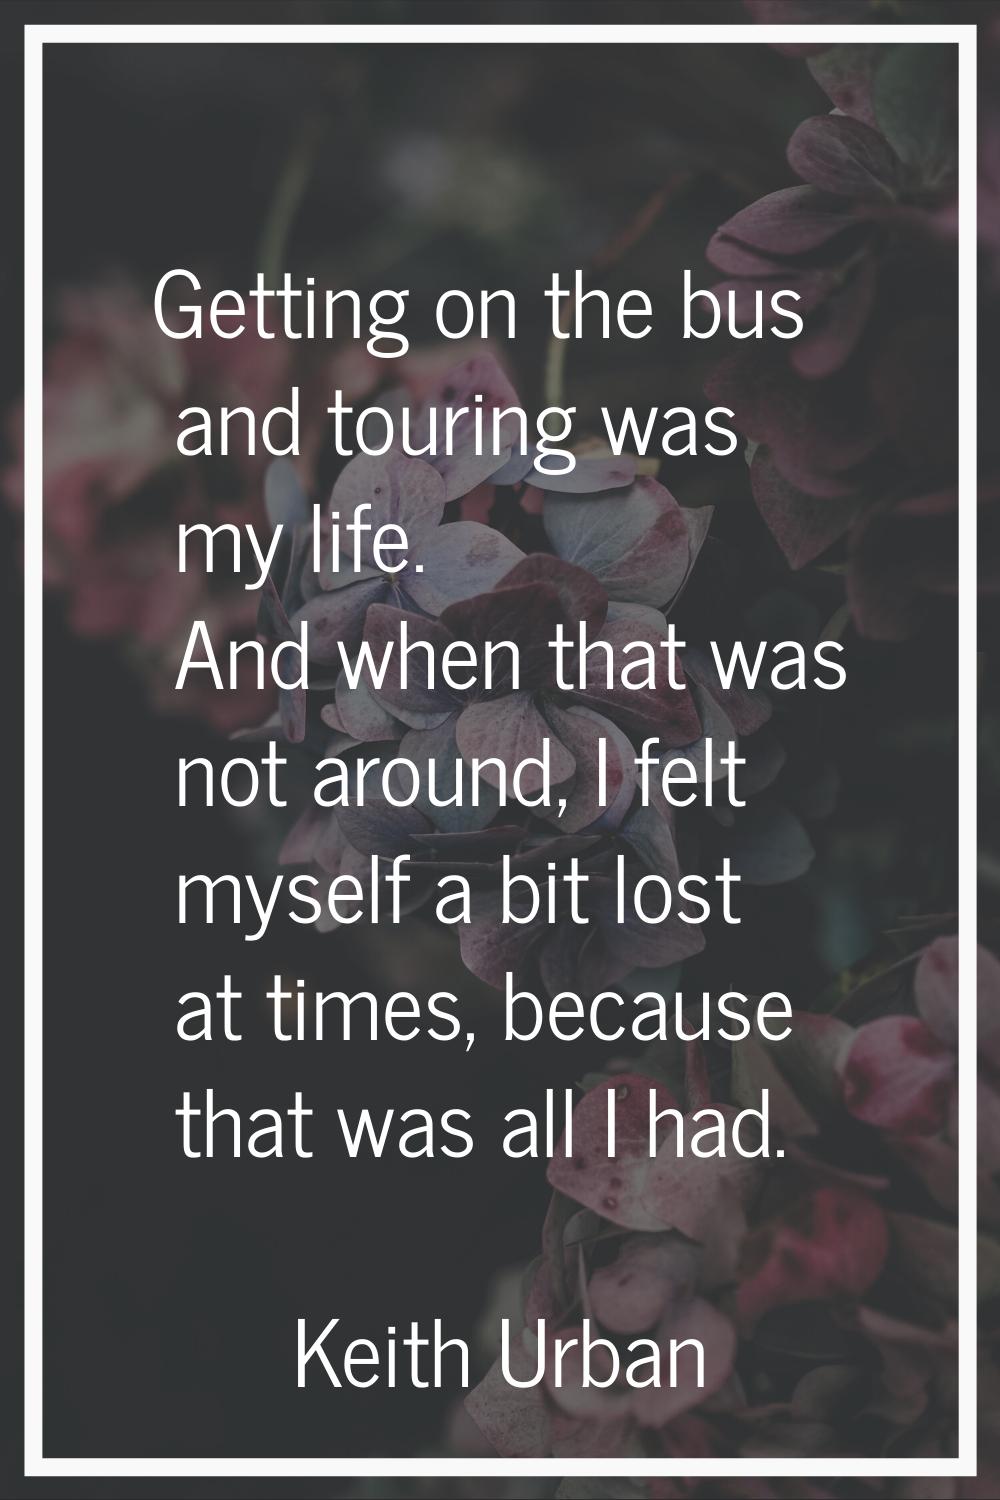 Getting on the bus and touring was my life. And when that was not around, I felt myself a bit lost 